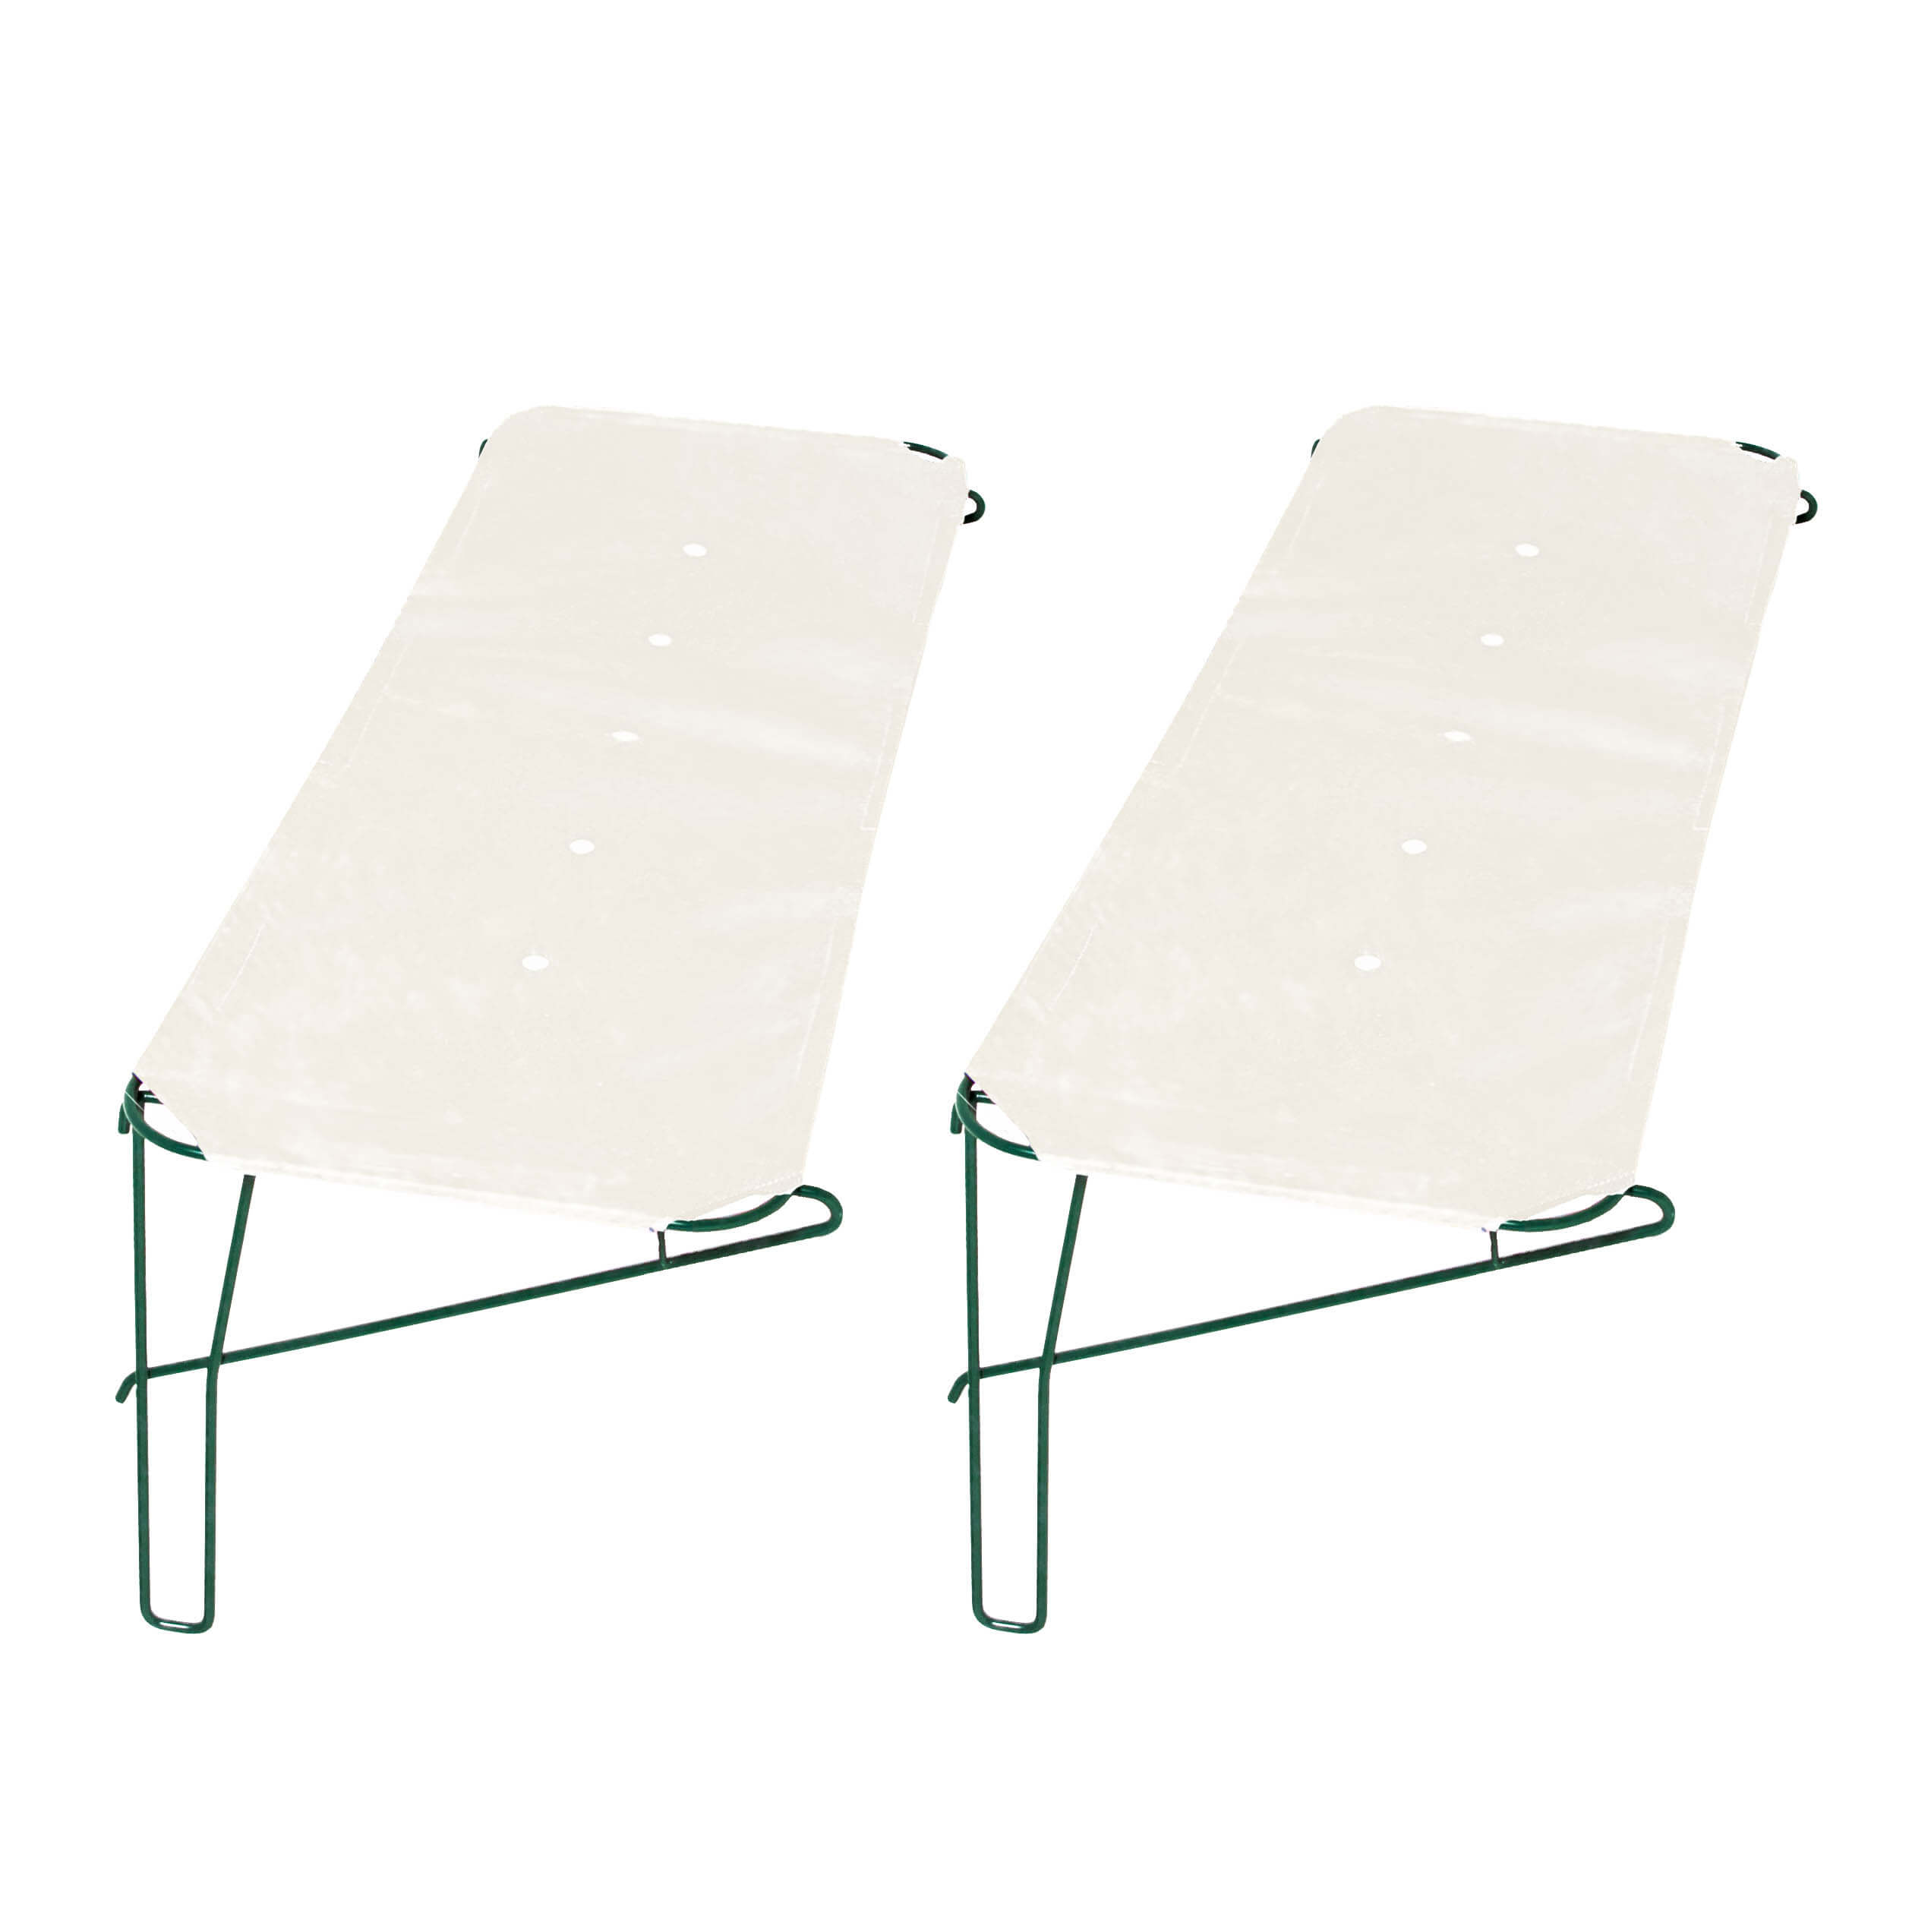 Two white fabric outdoor cat shelves for cat runs